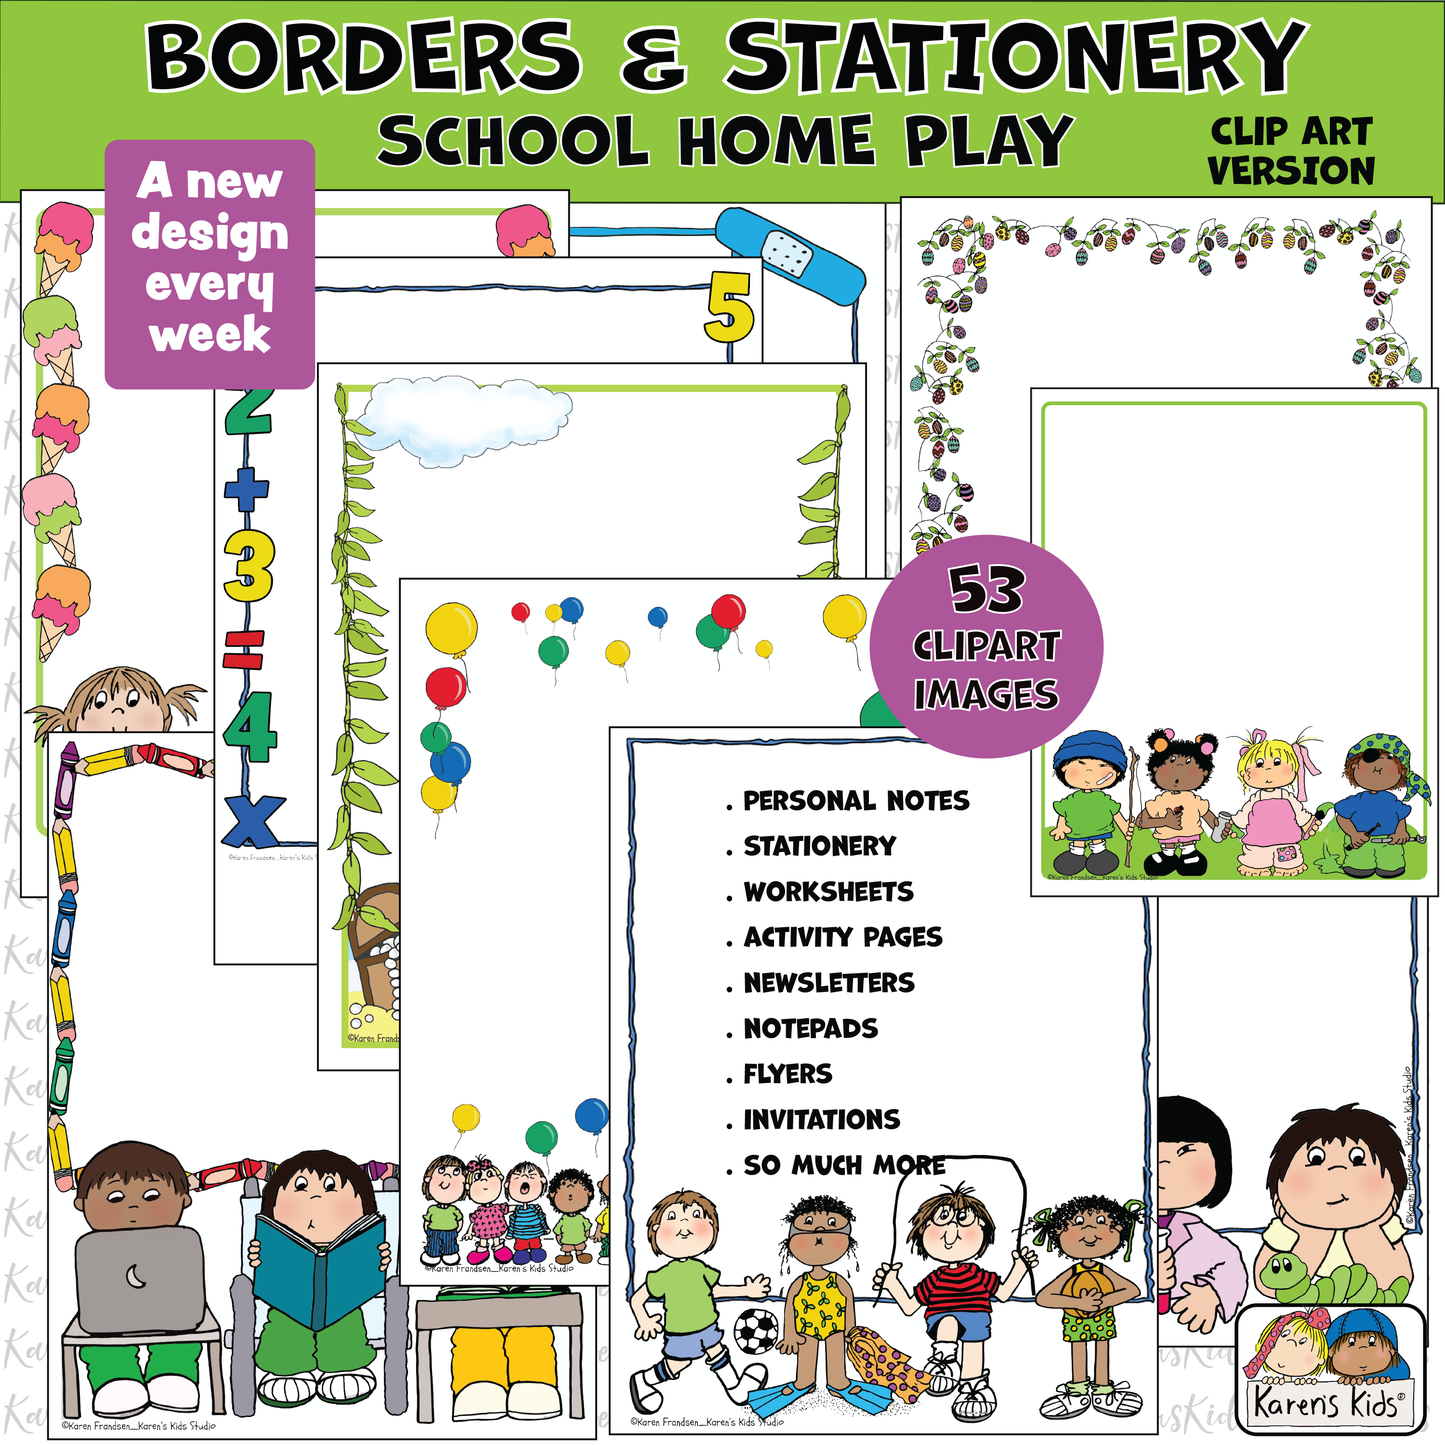 Title reads BORDERS, STATIONERY,School Home Play Themed clip art version. 53 CLIPART IMAGES. 10 sample pages show borders with pictures of rows of kids, reading, walking, playing, numbers, letters, colorful images and more.